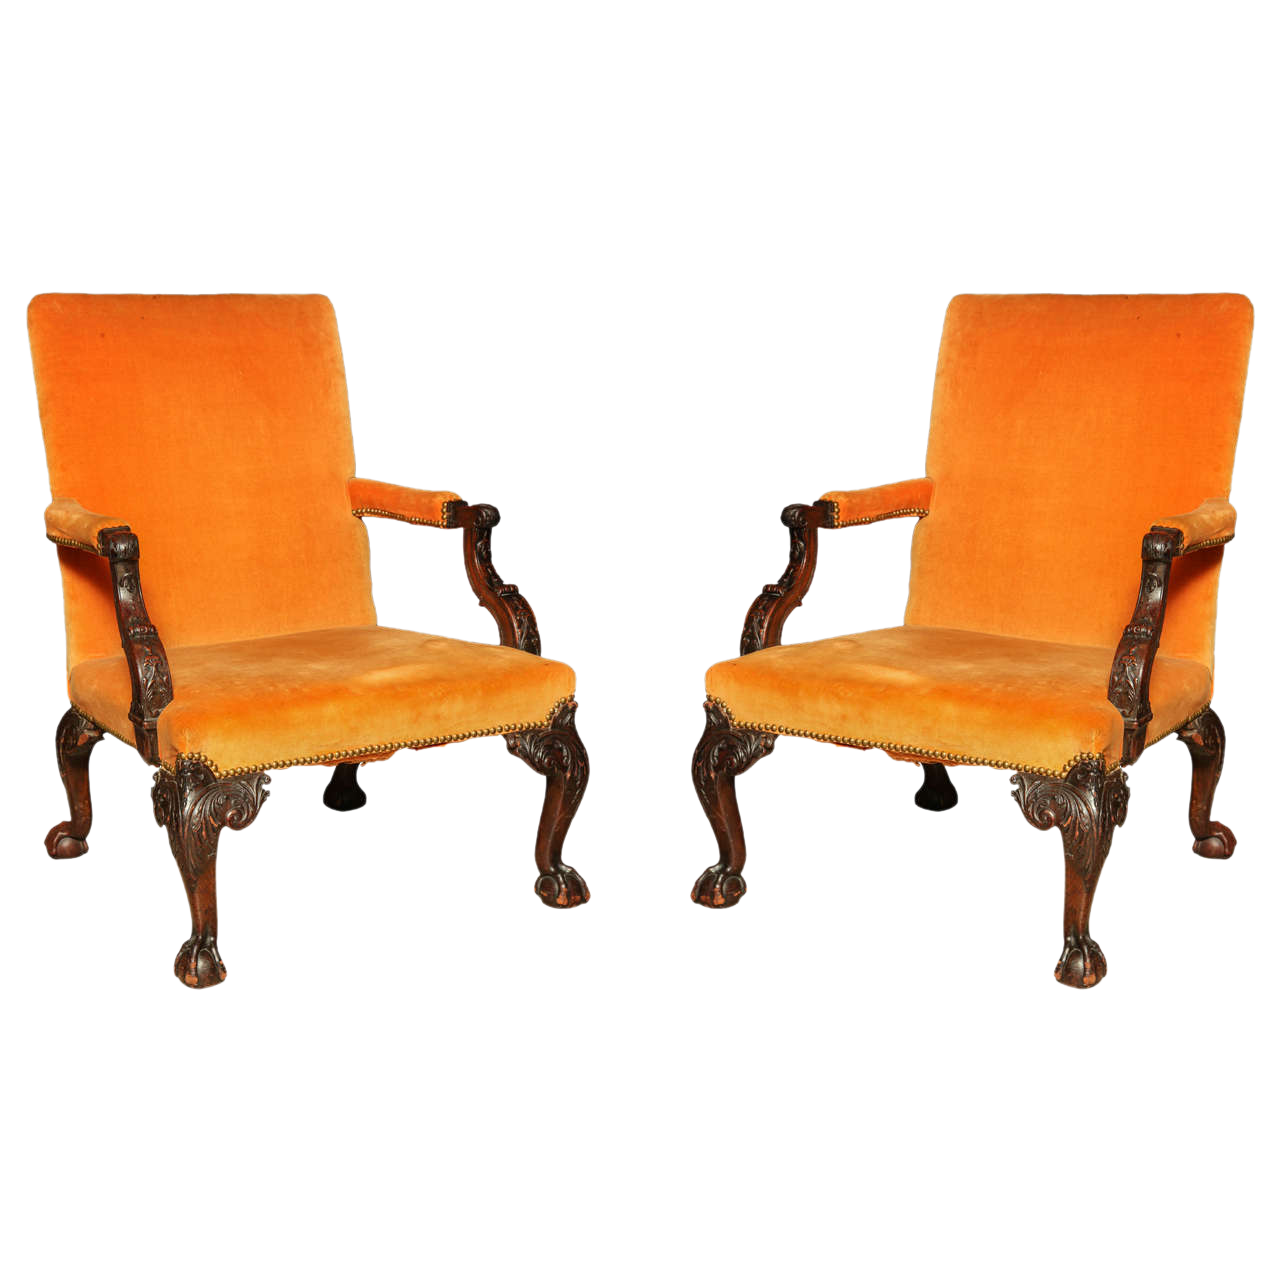 Gainsborough Chair Photos Free Download PNG HD PNG Image